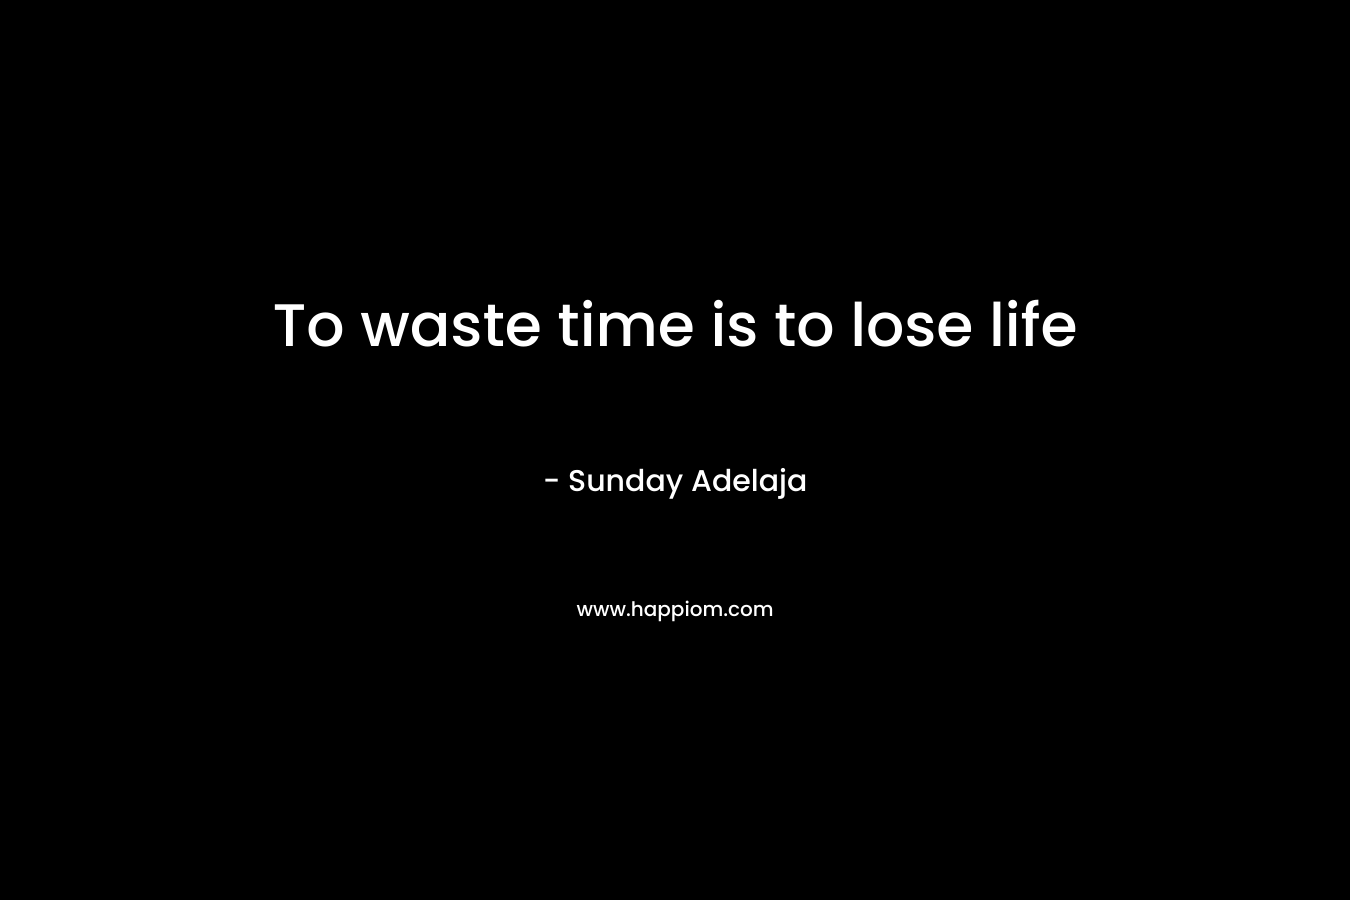 To waste time is to lose life